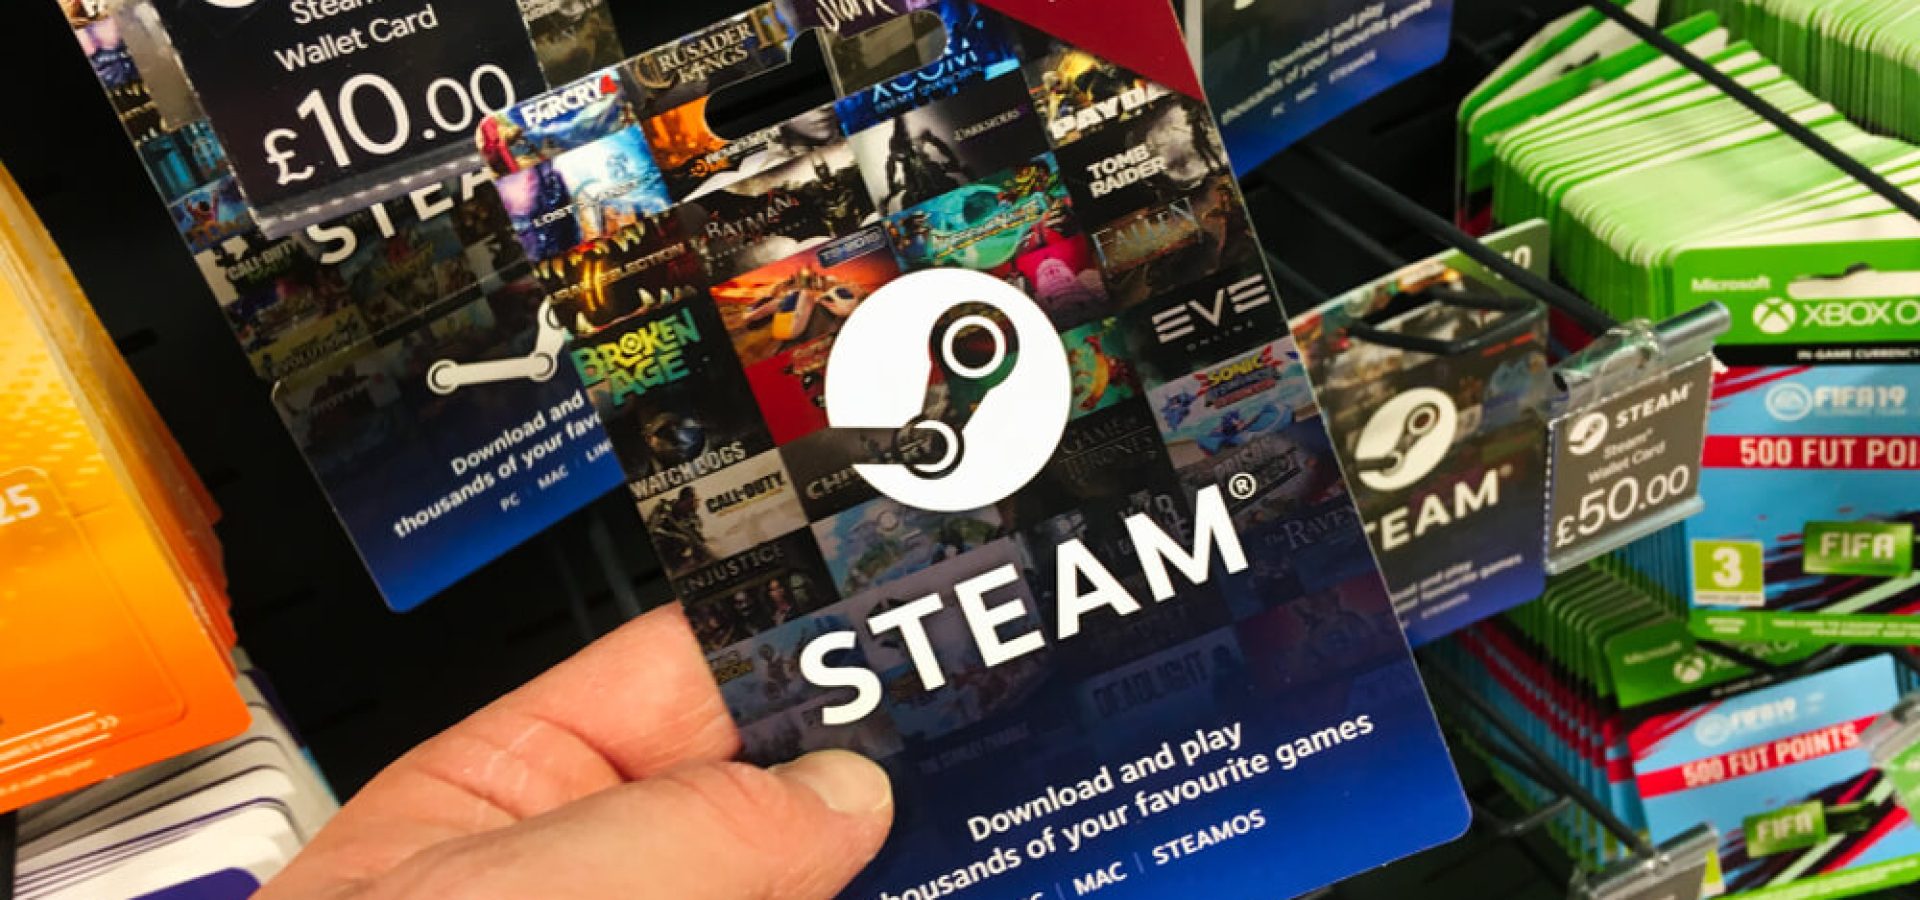 Gift card voucher for steam wallet money credit on a shelf in a shop.